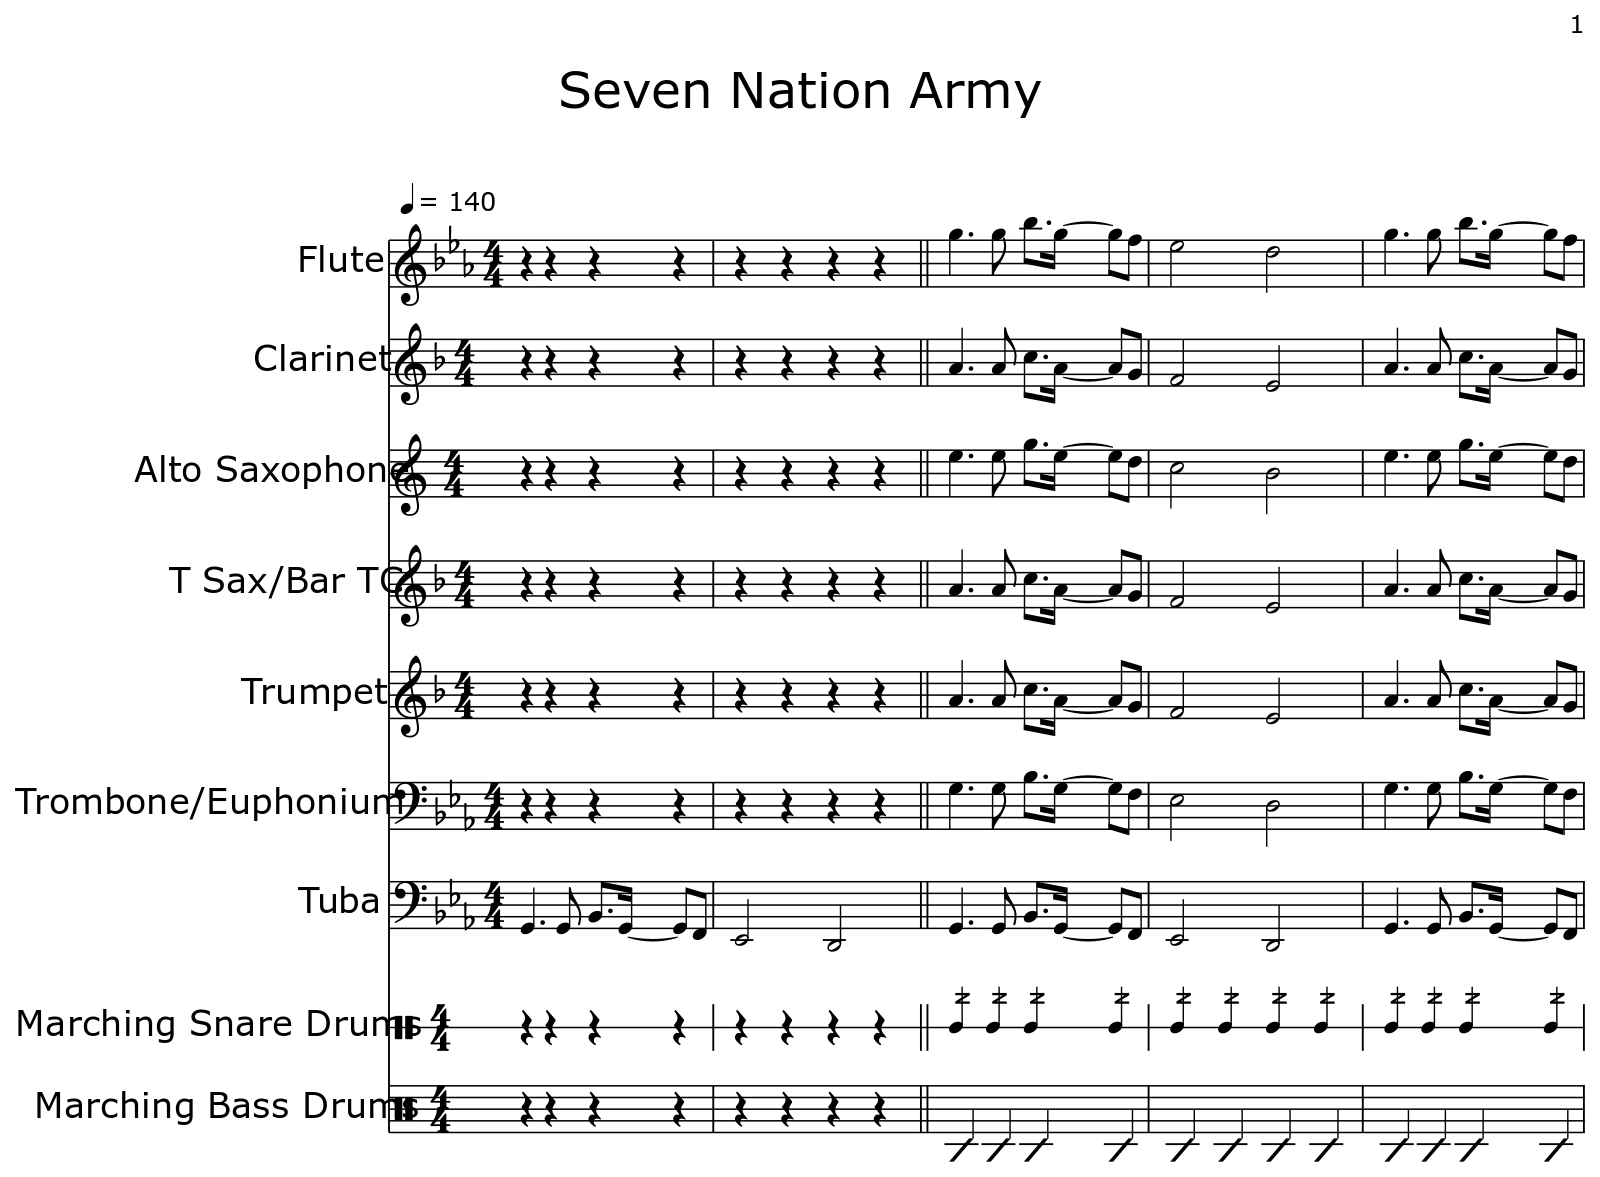 Seven Nation Army - Sheet music for Flute, Clarinet, Alto Saxophone ...